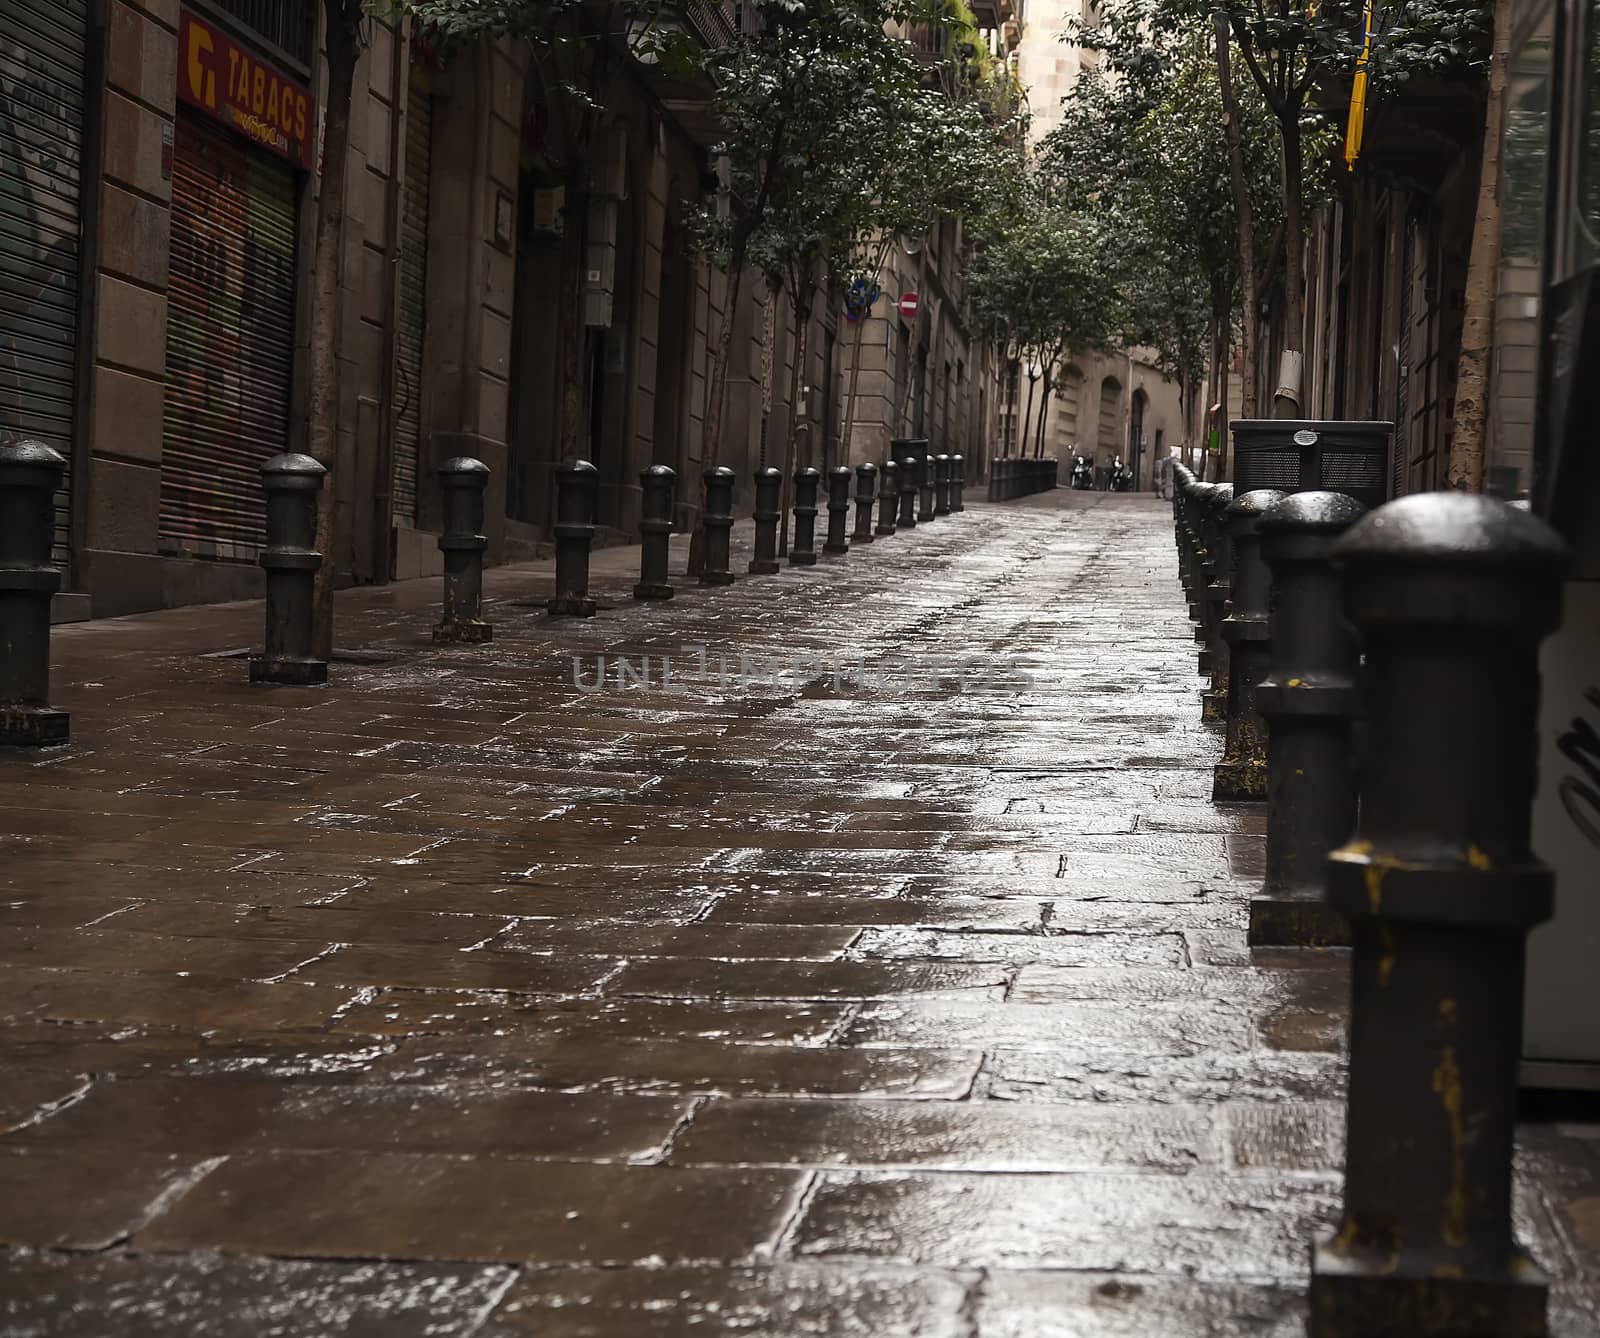 A wet street with some leding lines and poles